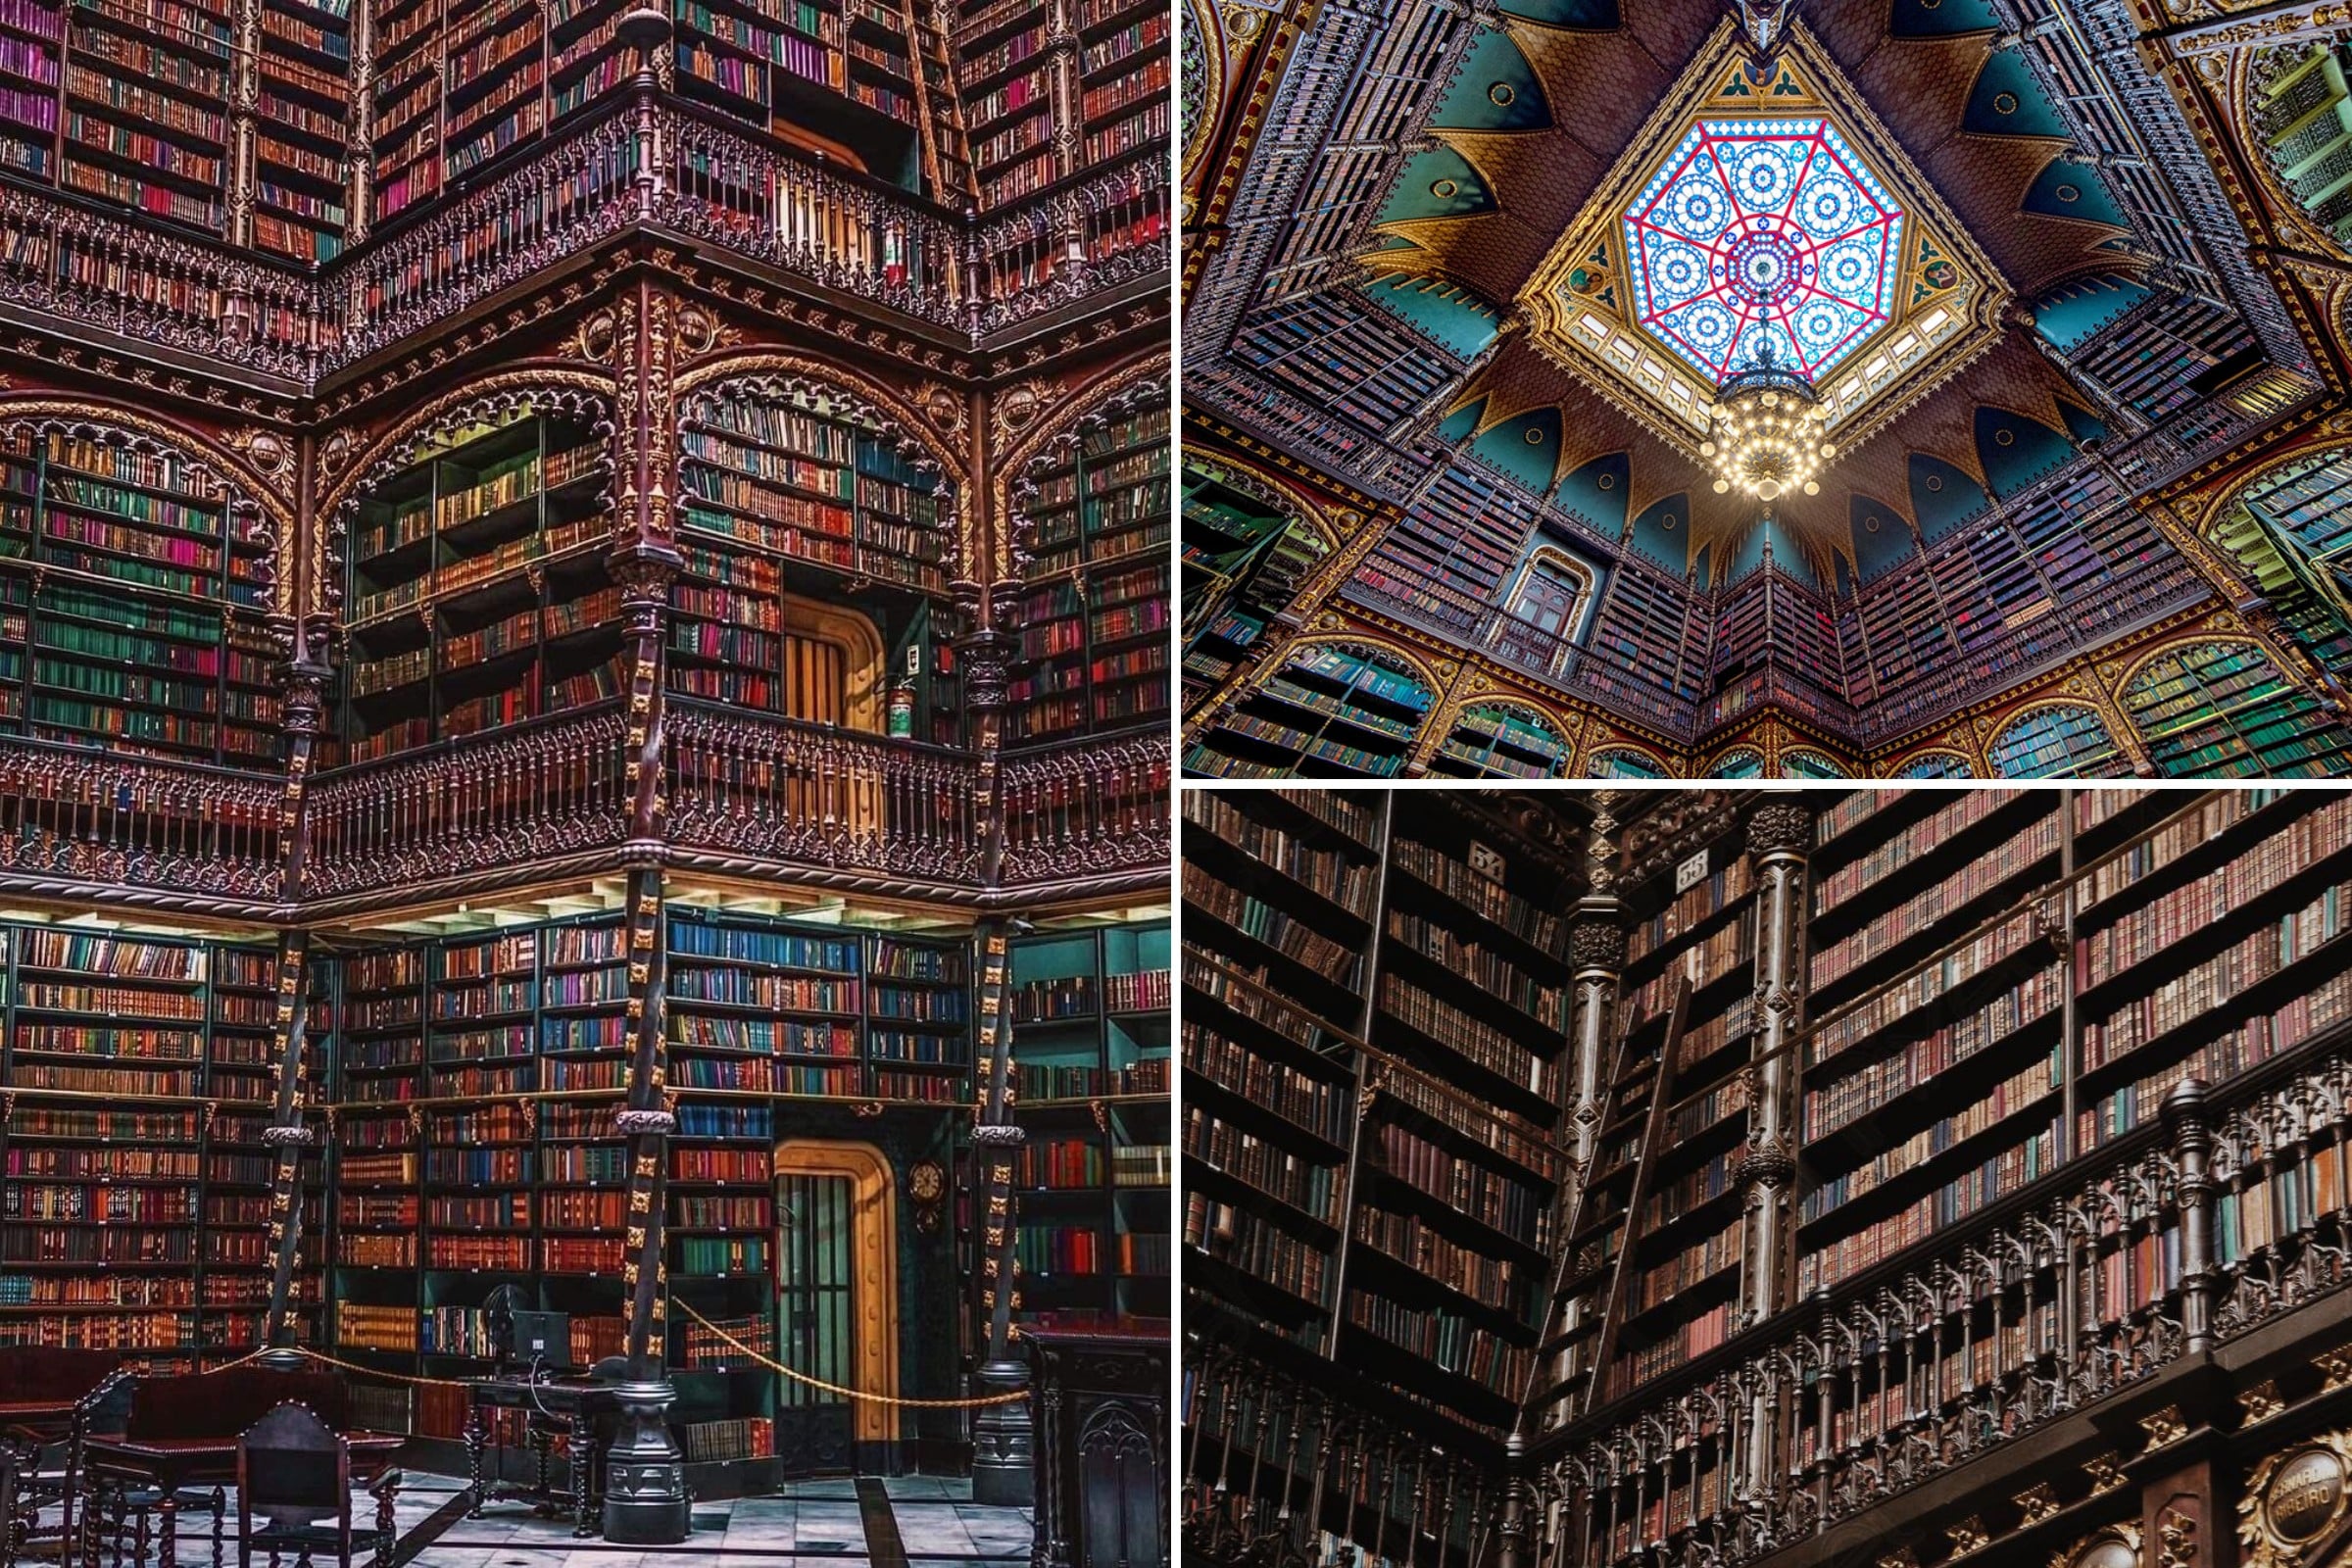 Inside 9 Most Beautiful Libraries In The World - Royal Portuguese Cabinet of Reading